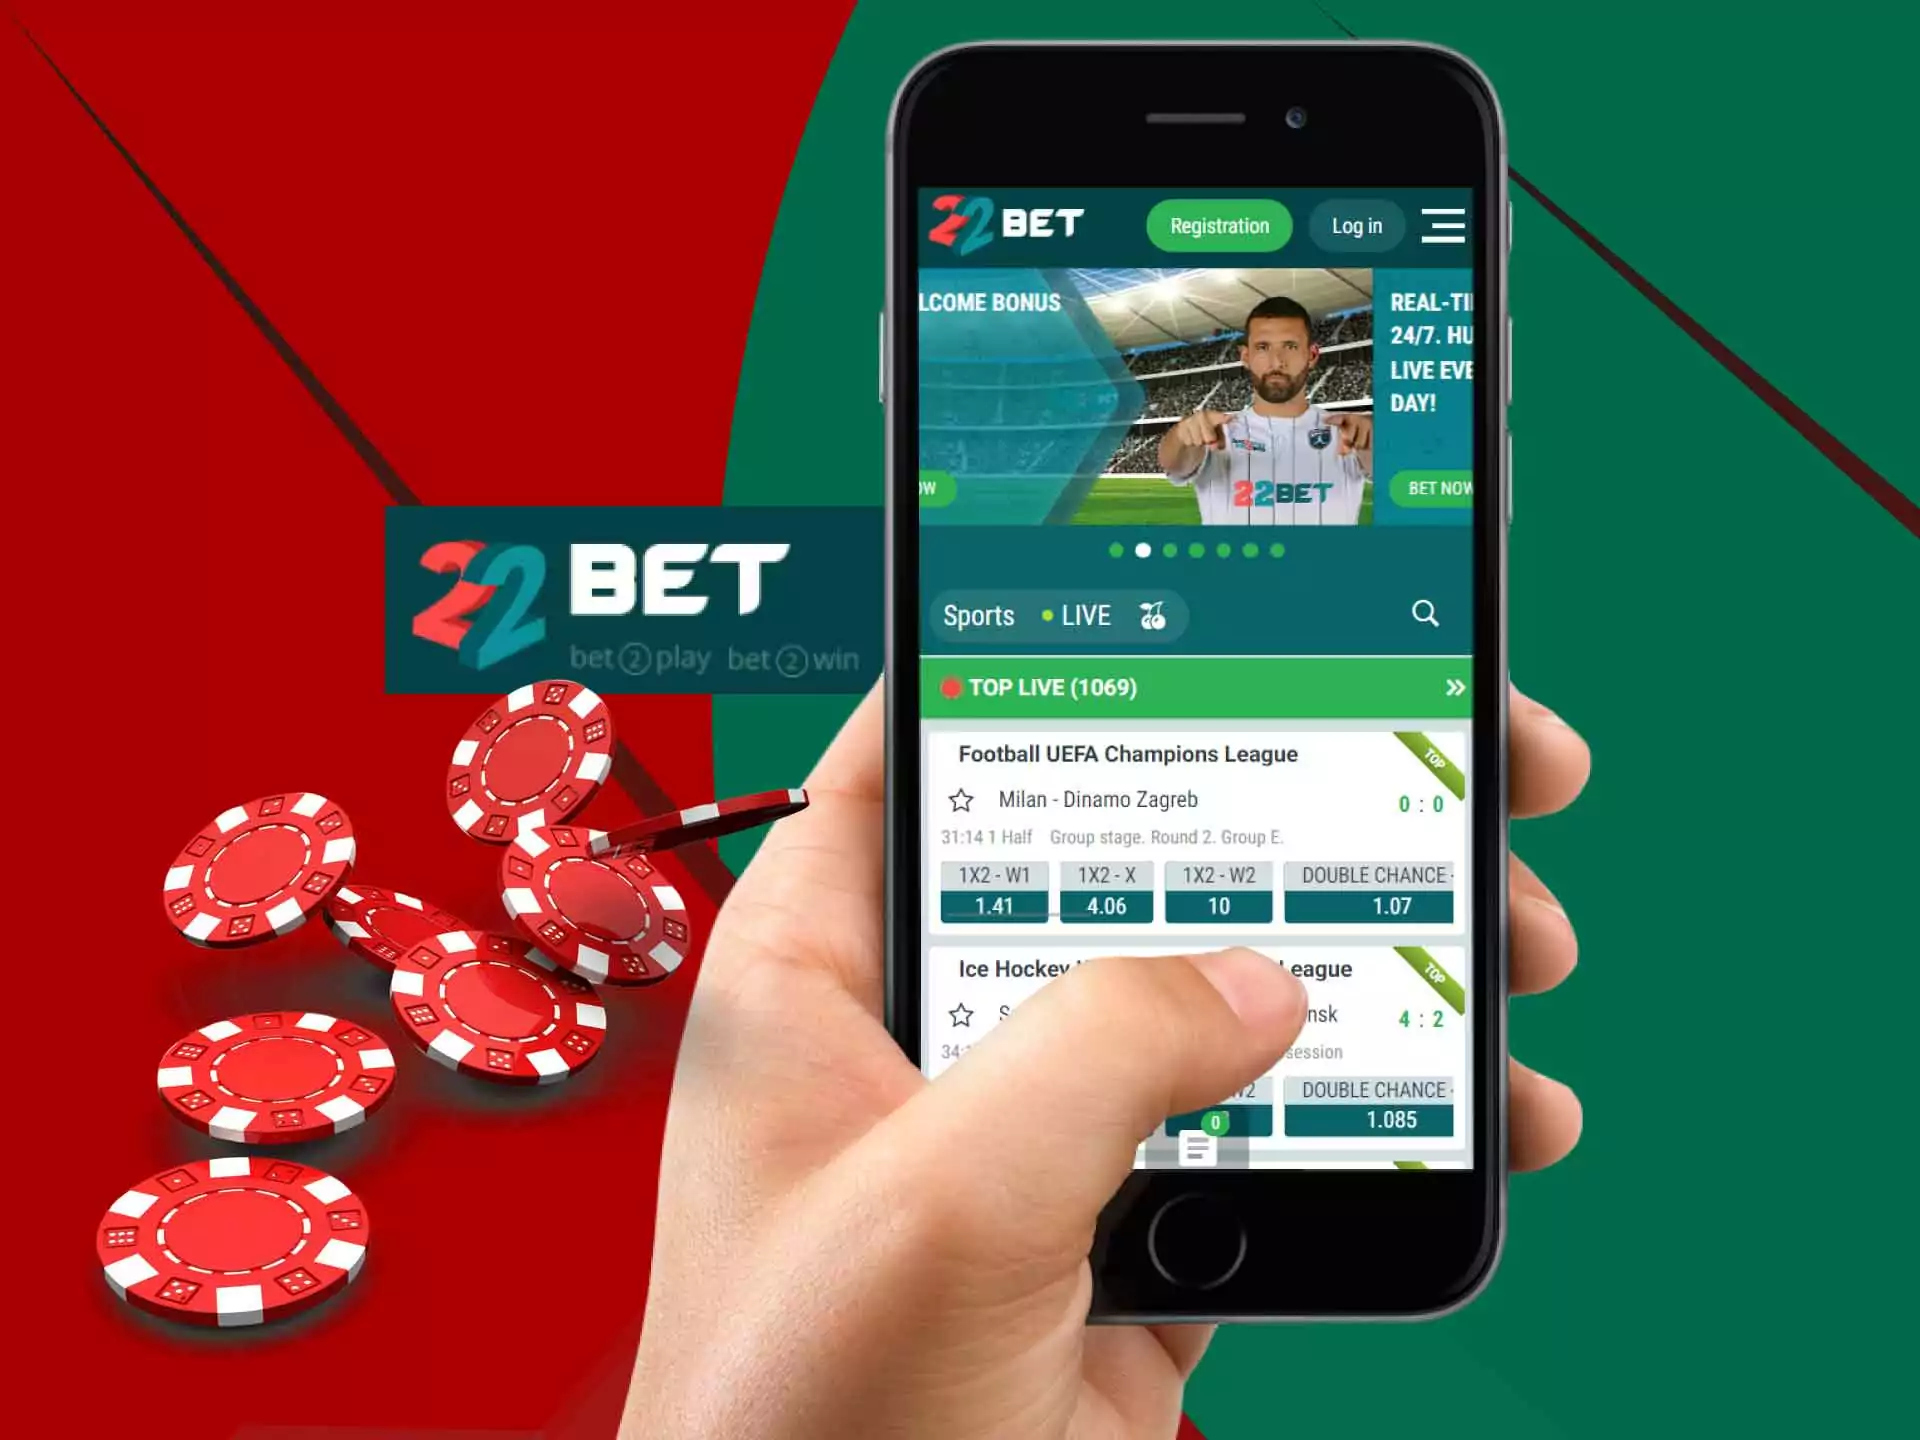 You can get access to 22Bet not only via the laptop but via the mobile browser.